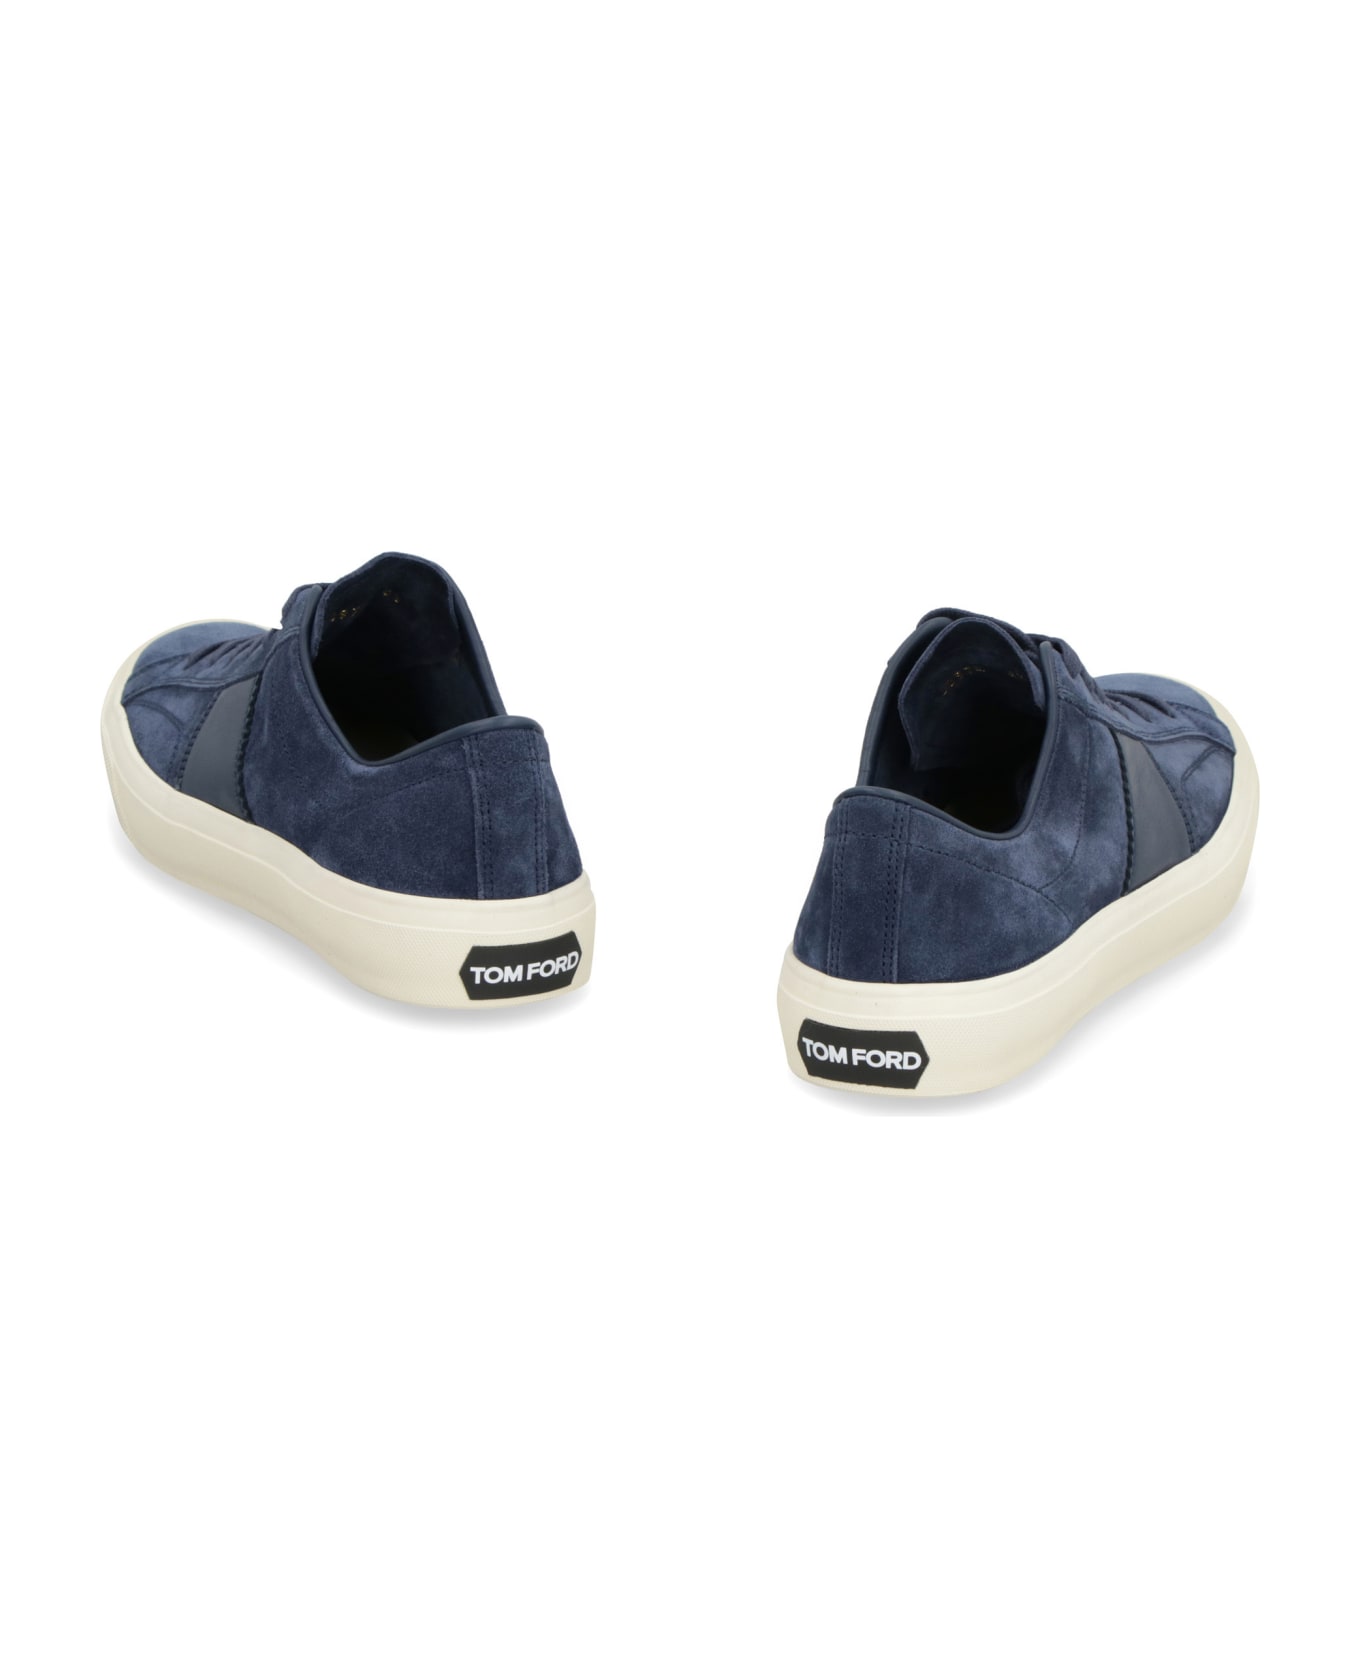 Tom Ford Cambridge Suede Sneakers - blue スニーカー